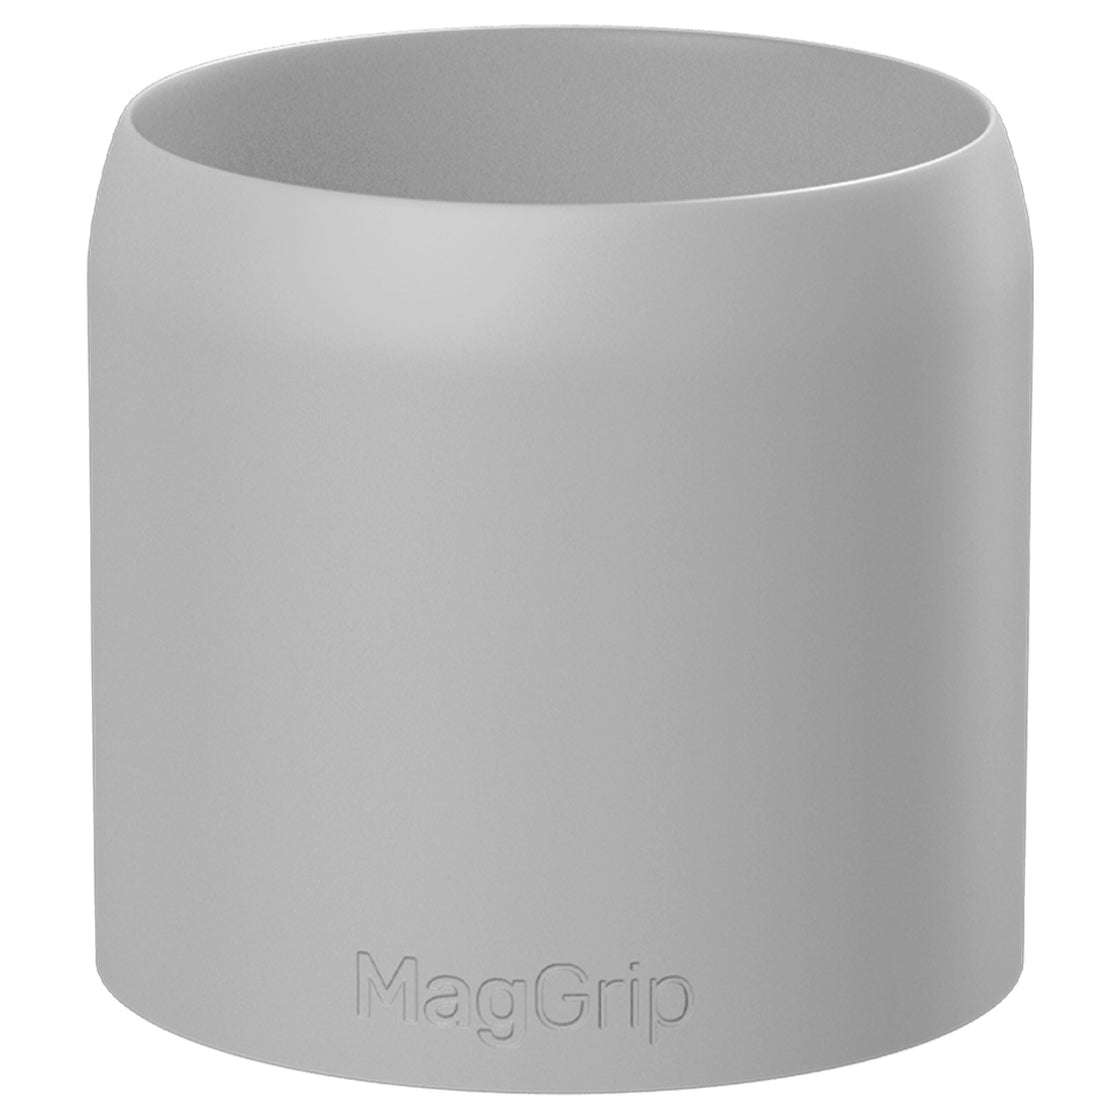 MagGrip Magnetic Silicone Spice Jar Grips - Gray